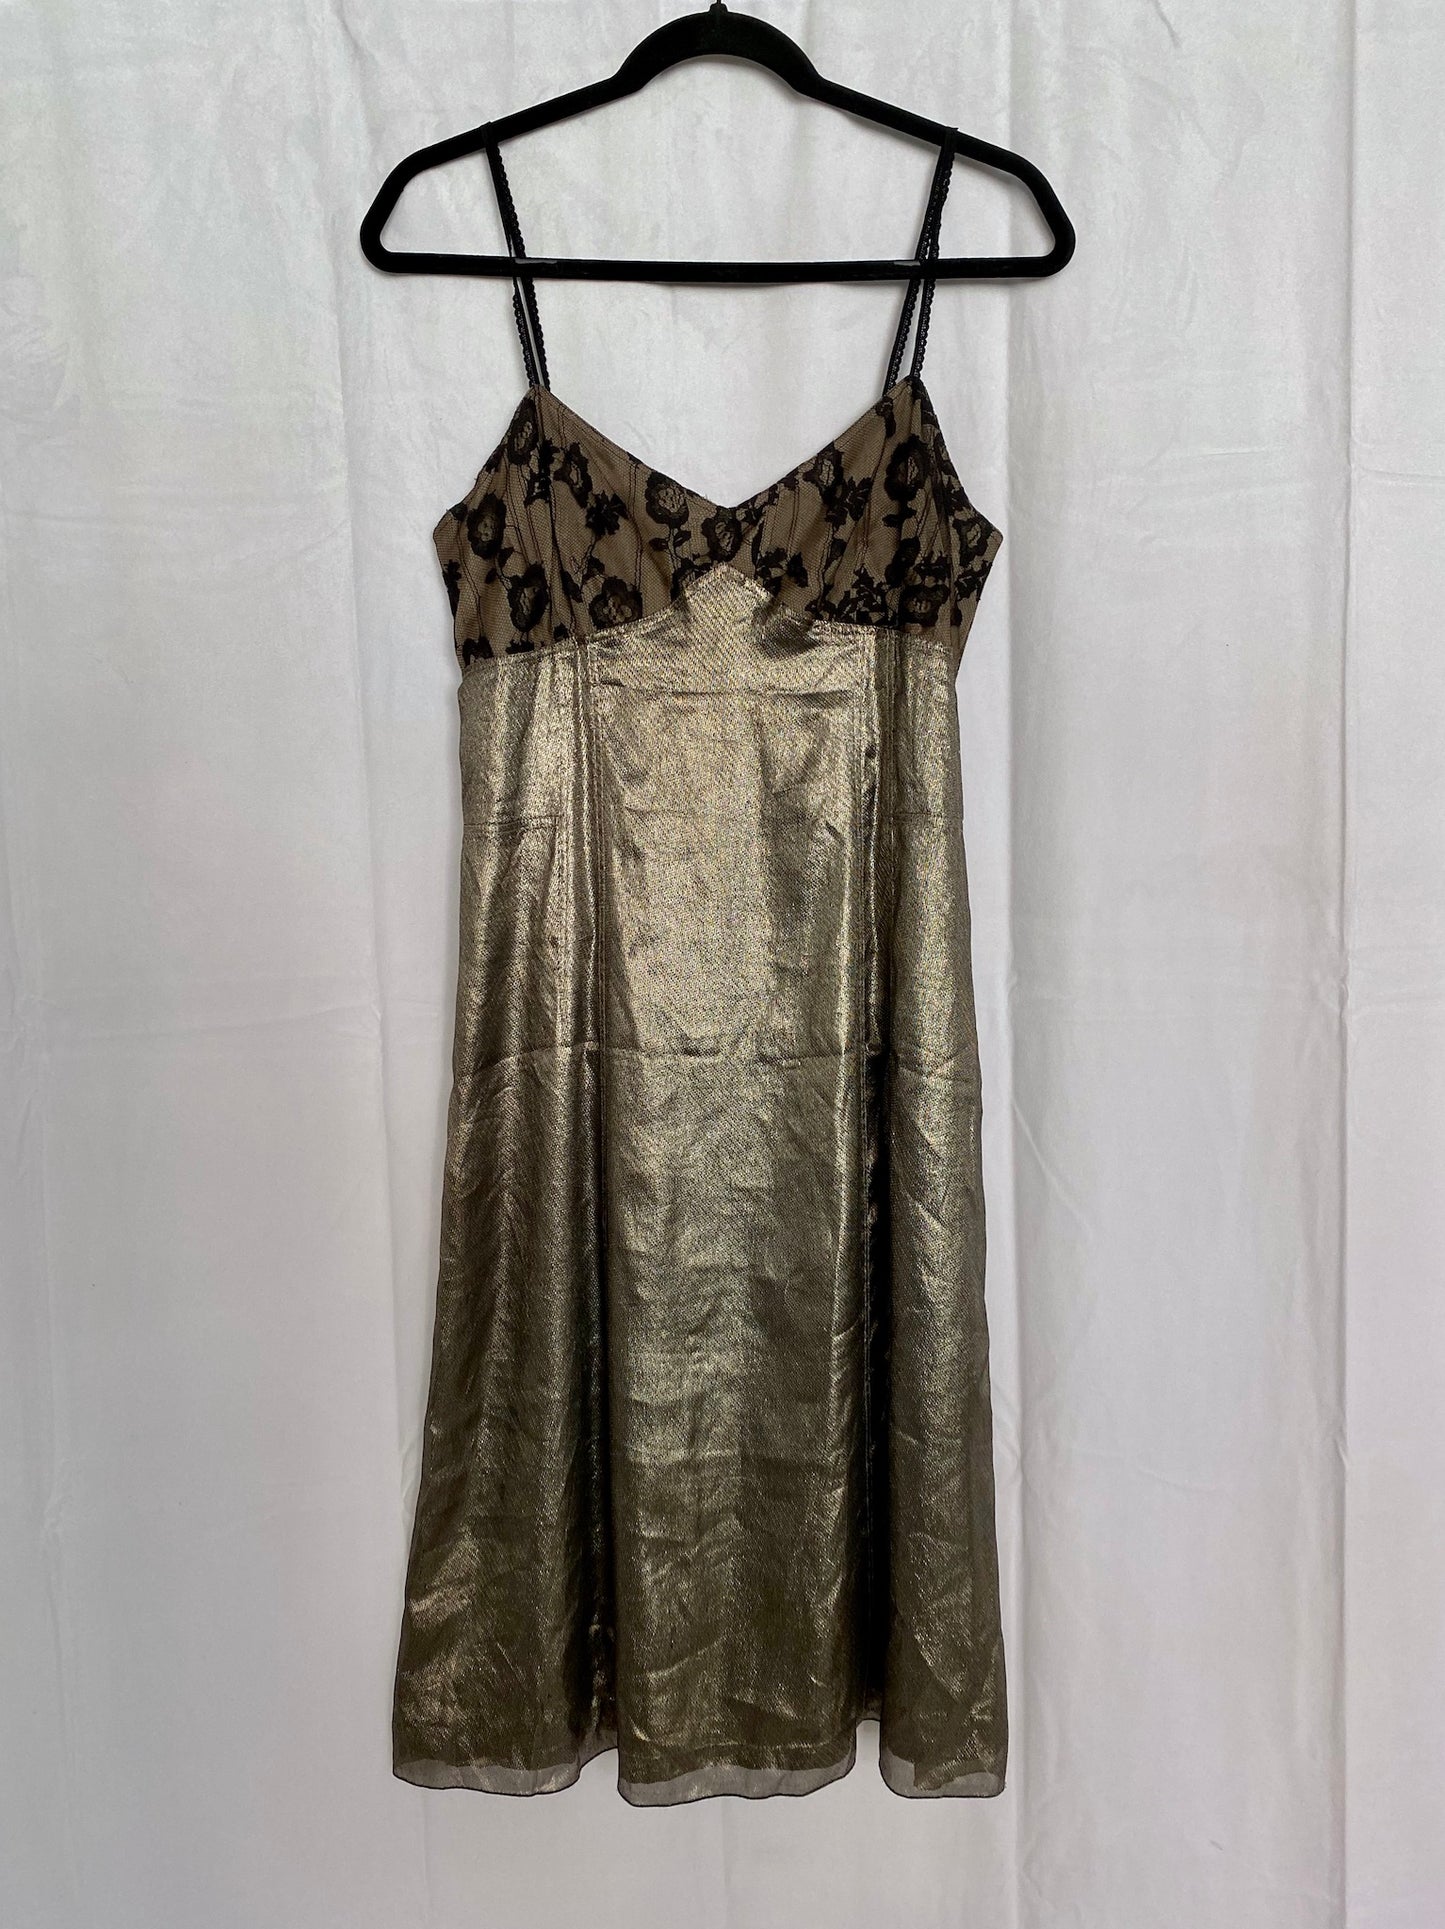 Early 2000s Marc Jacobs Lace Metallic Dress